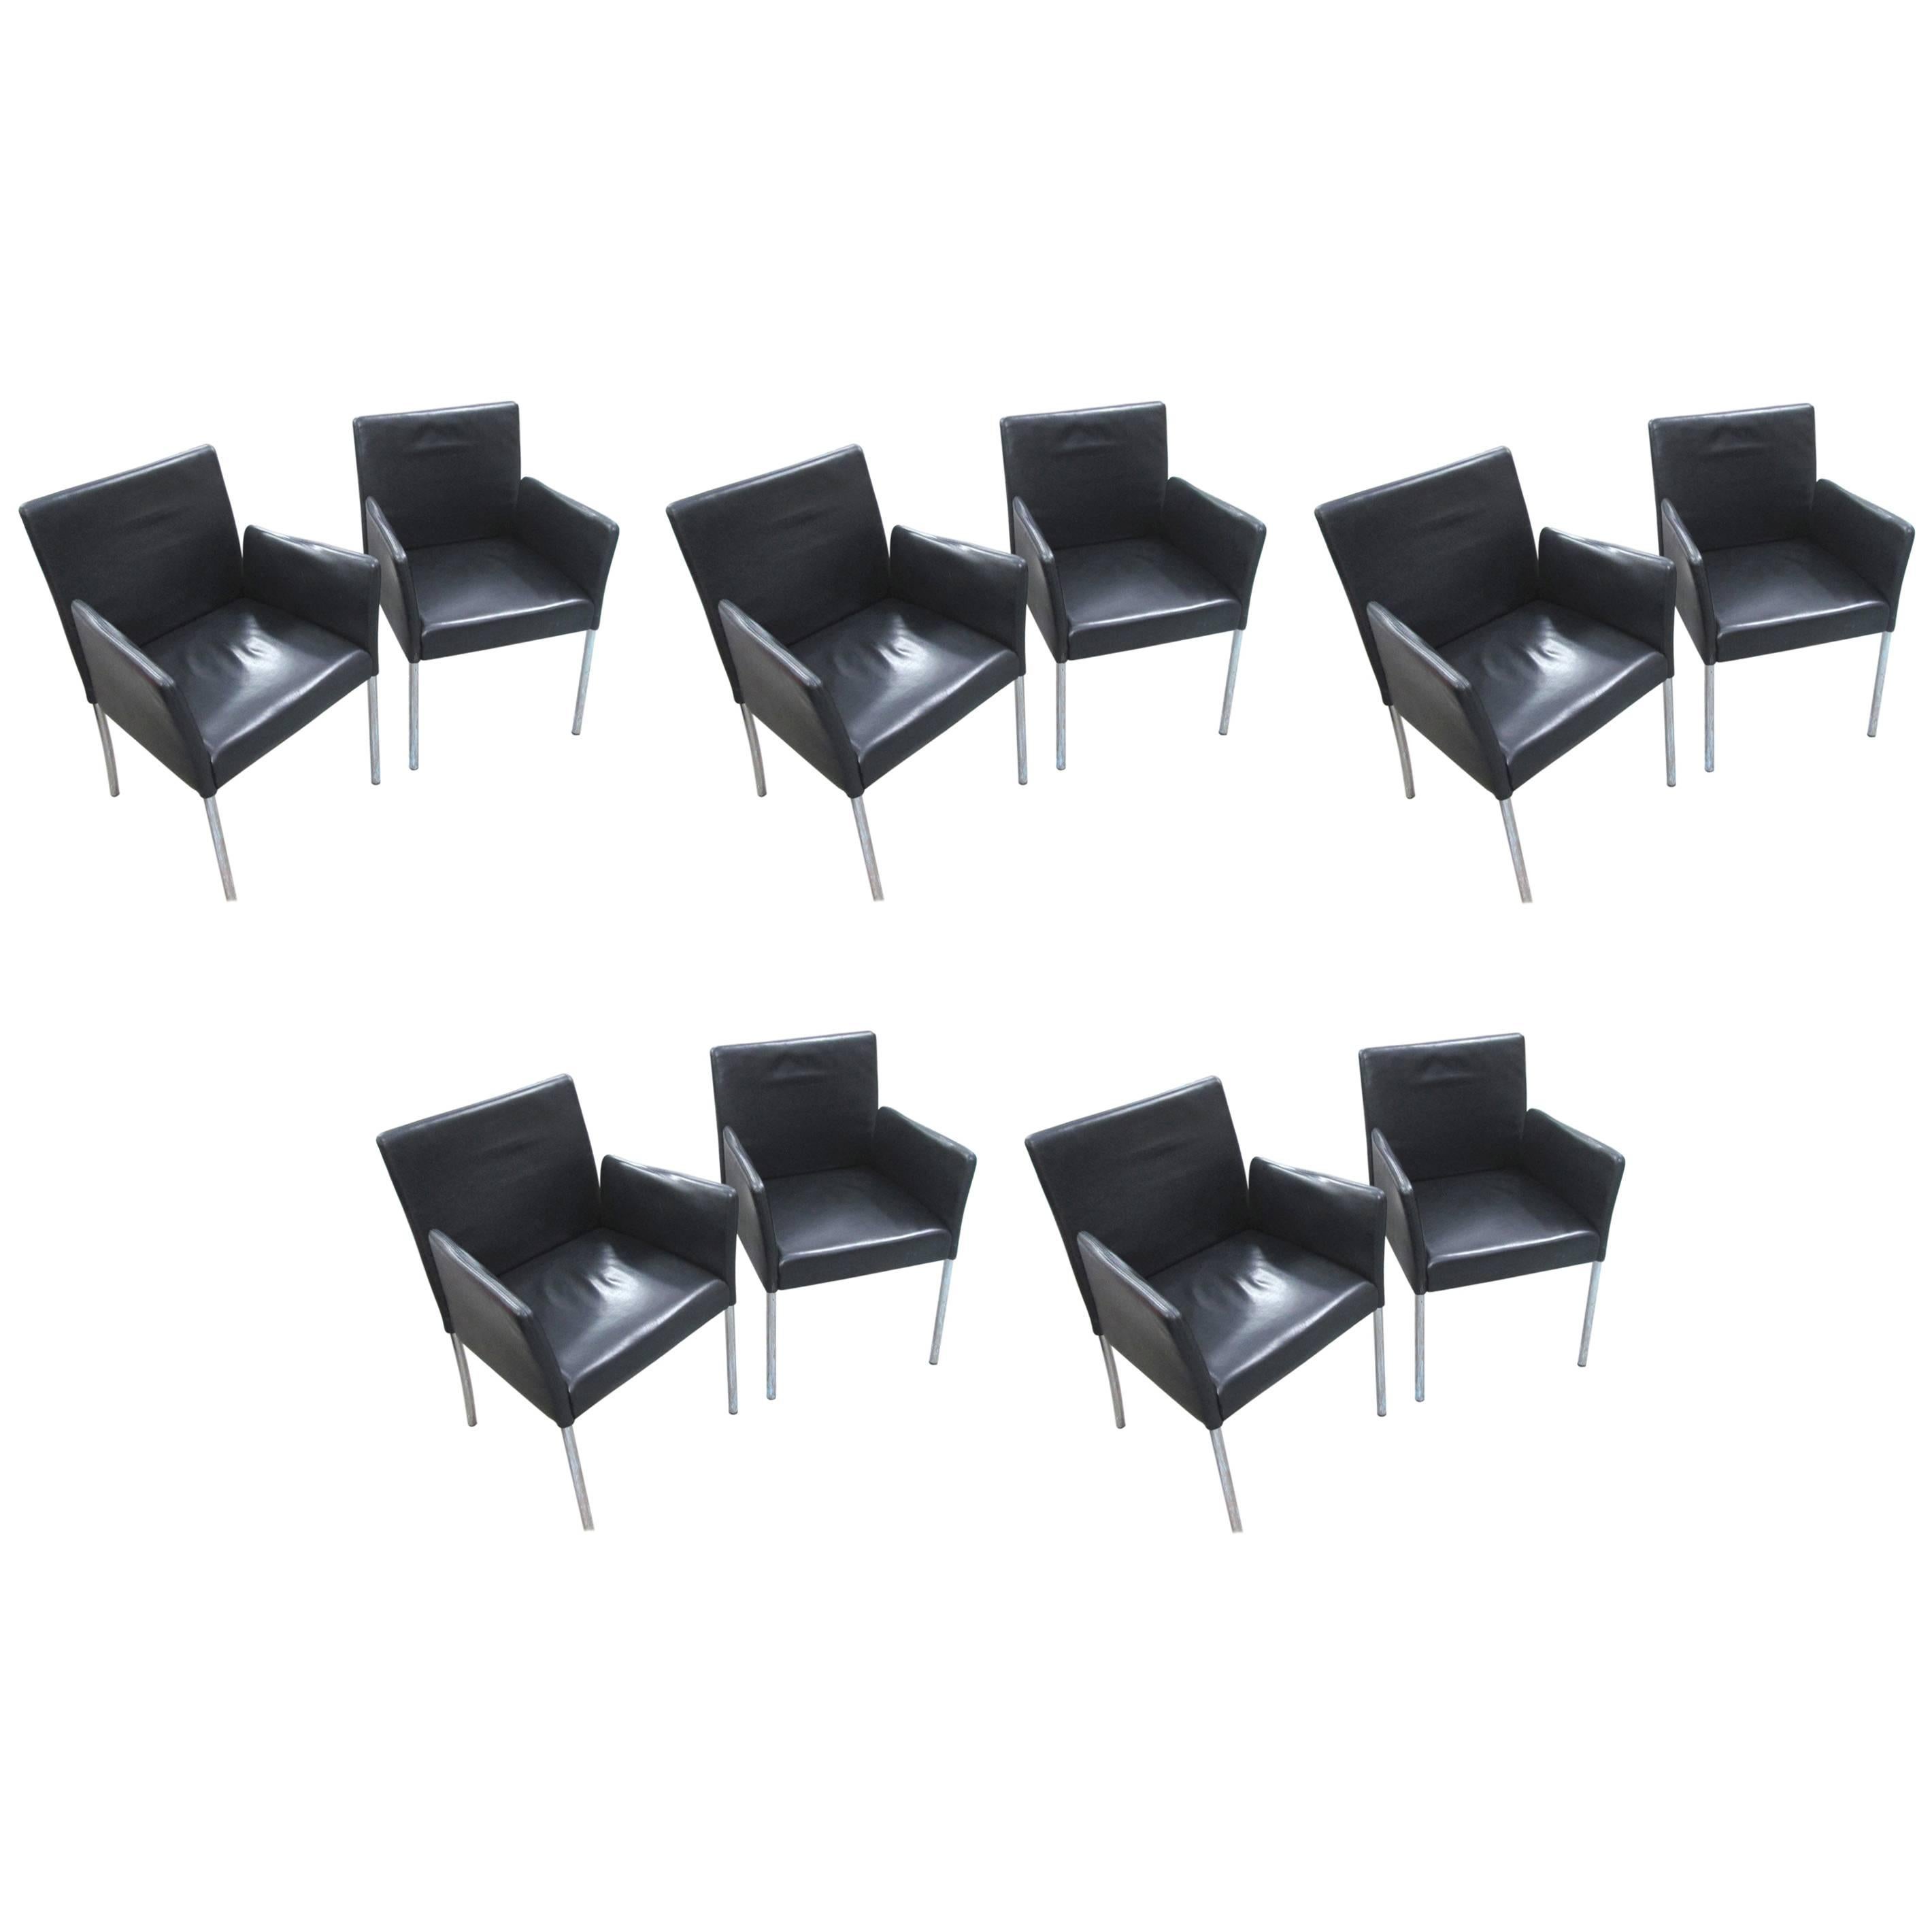 Walter Knoll 'Jason' Set of Ten Dining Chairs, Current Model For Sale